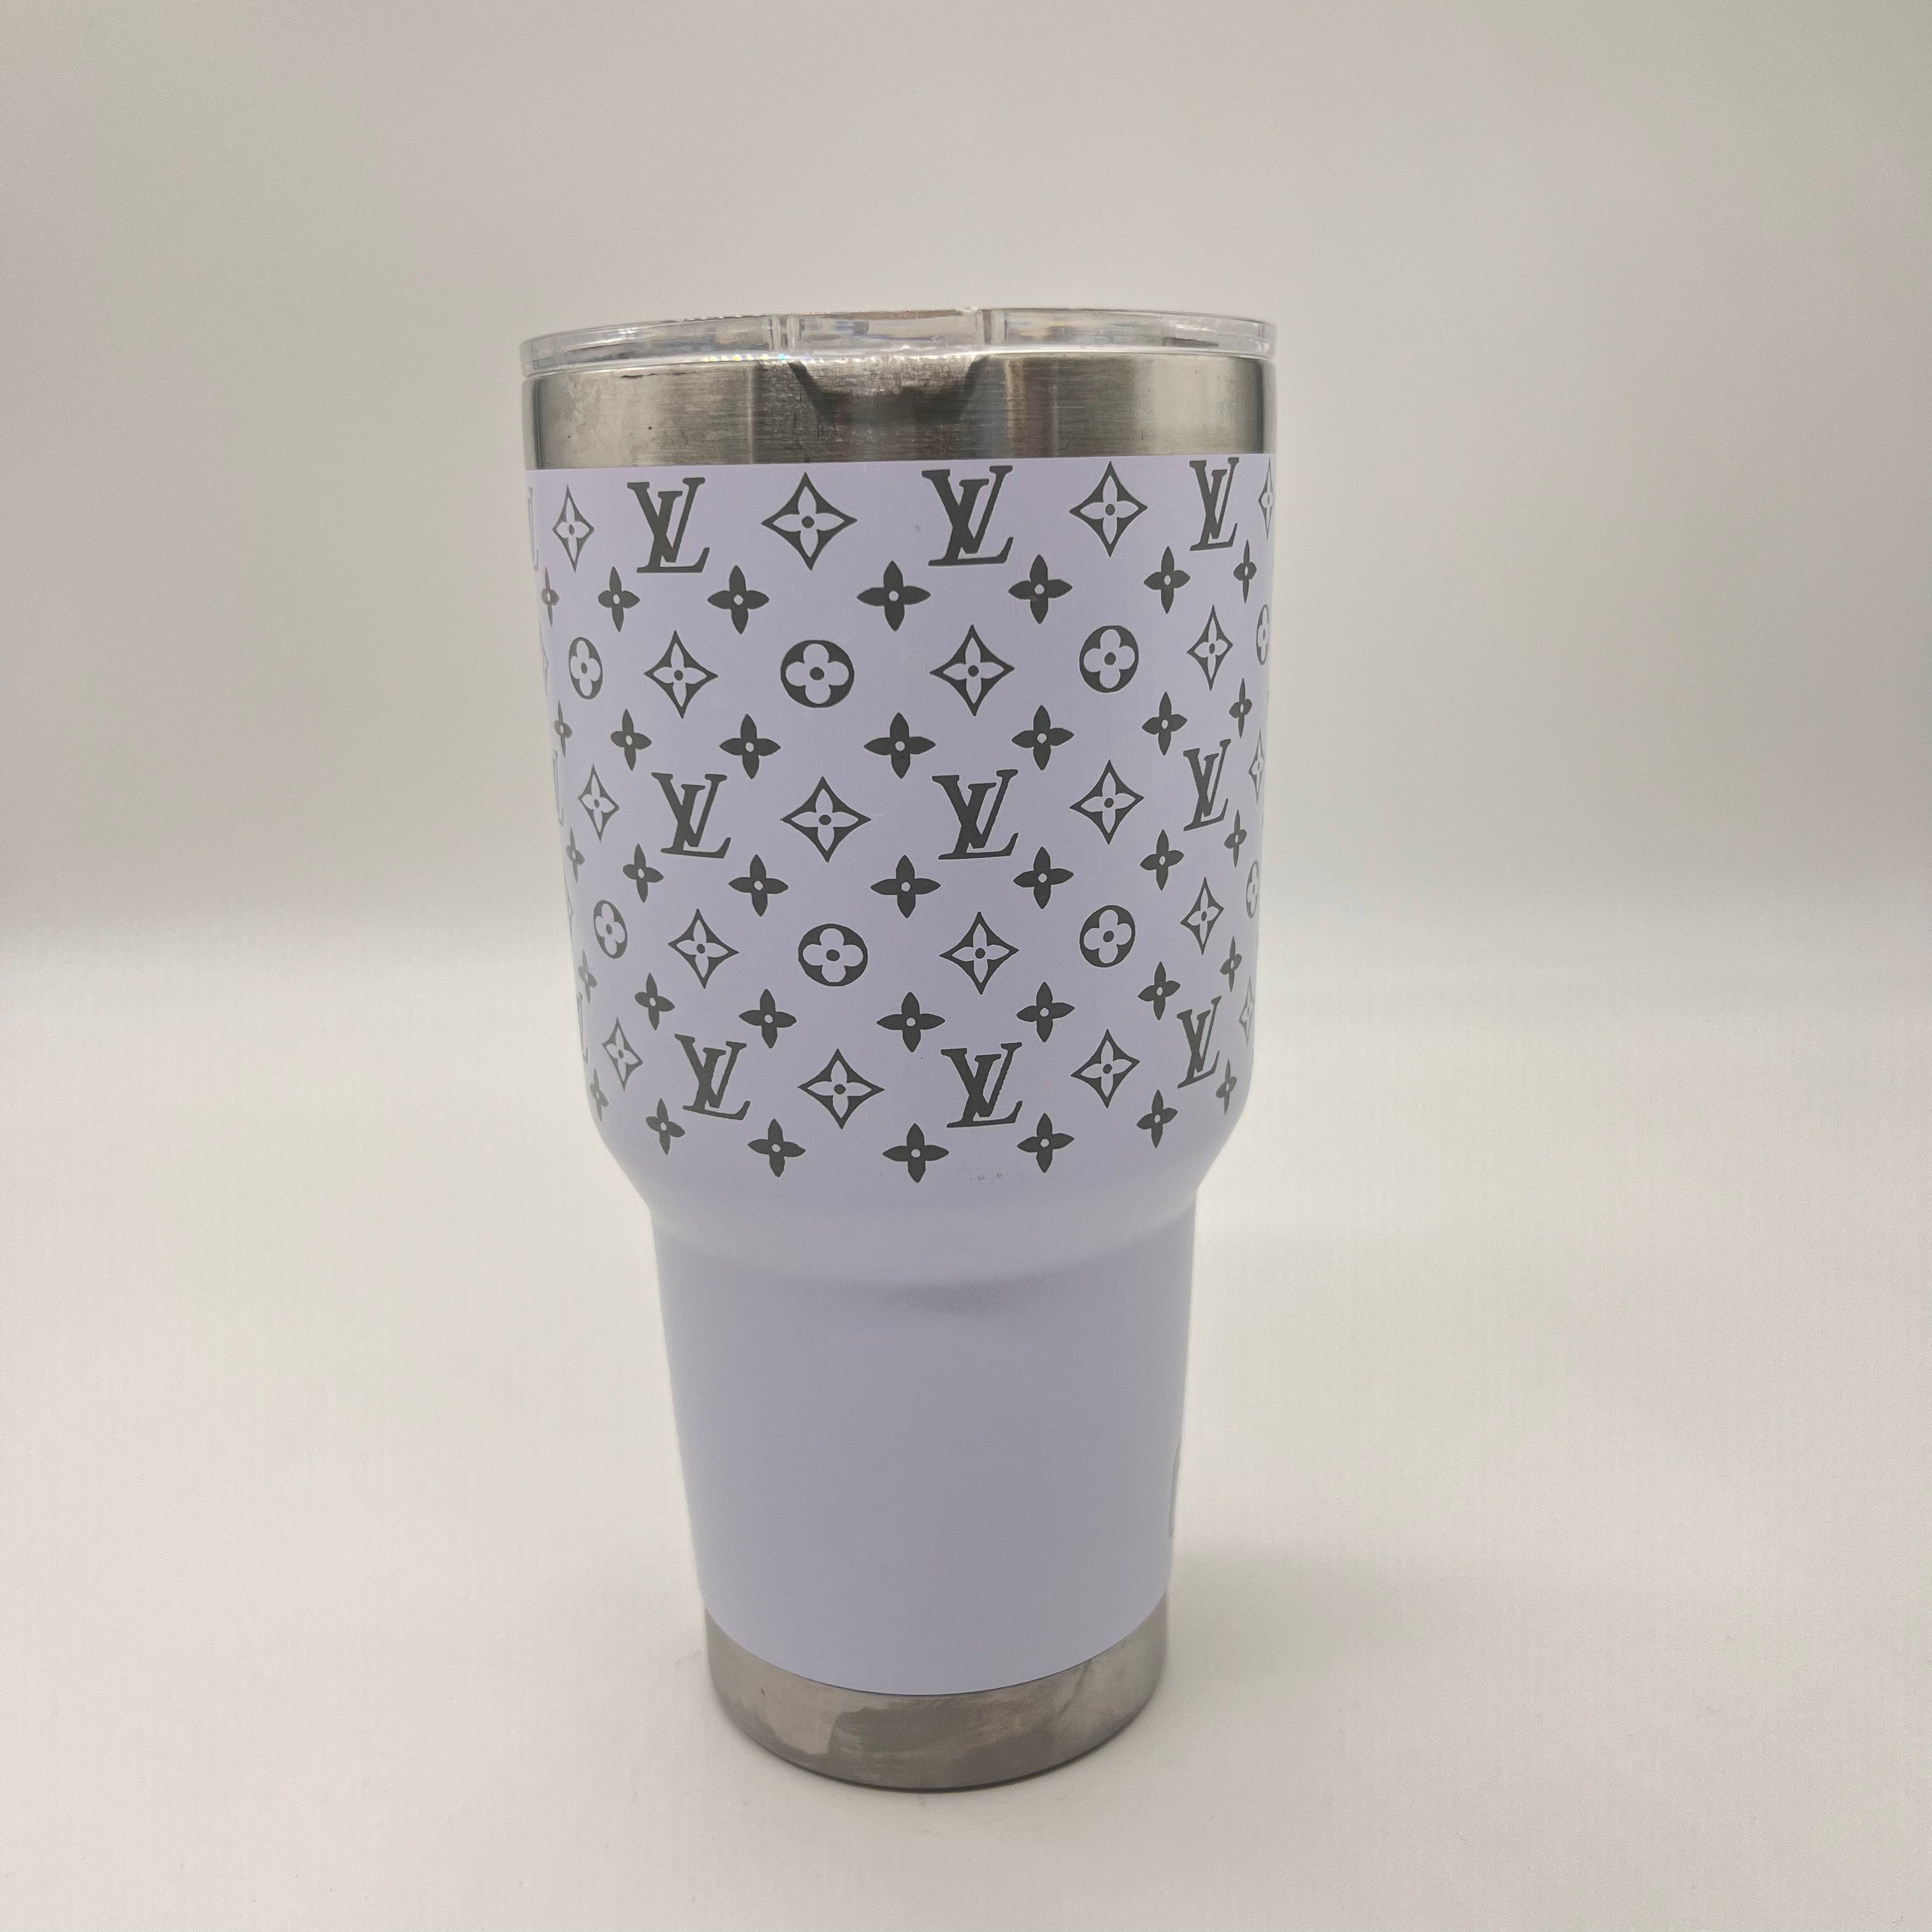 LV Laser Engraved Vacuum Insulated Cup with Magnetic Lid